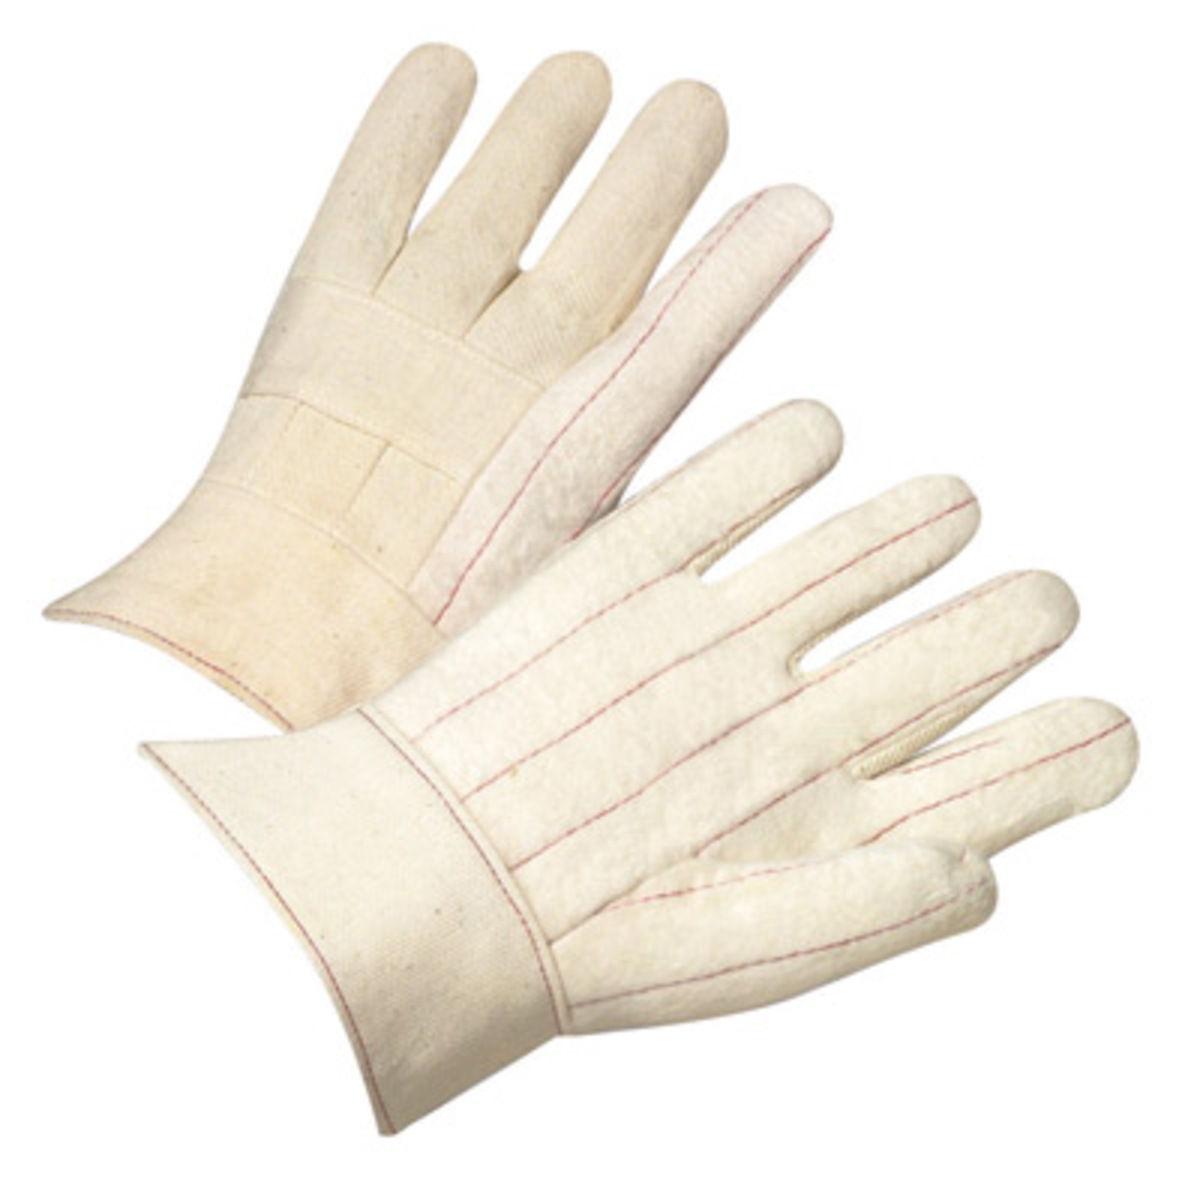 RADNOR® Natural Heavy Weight Cotton Hot Mill Gloves With Band Top Cuff